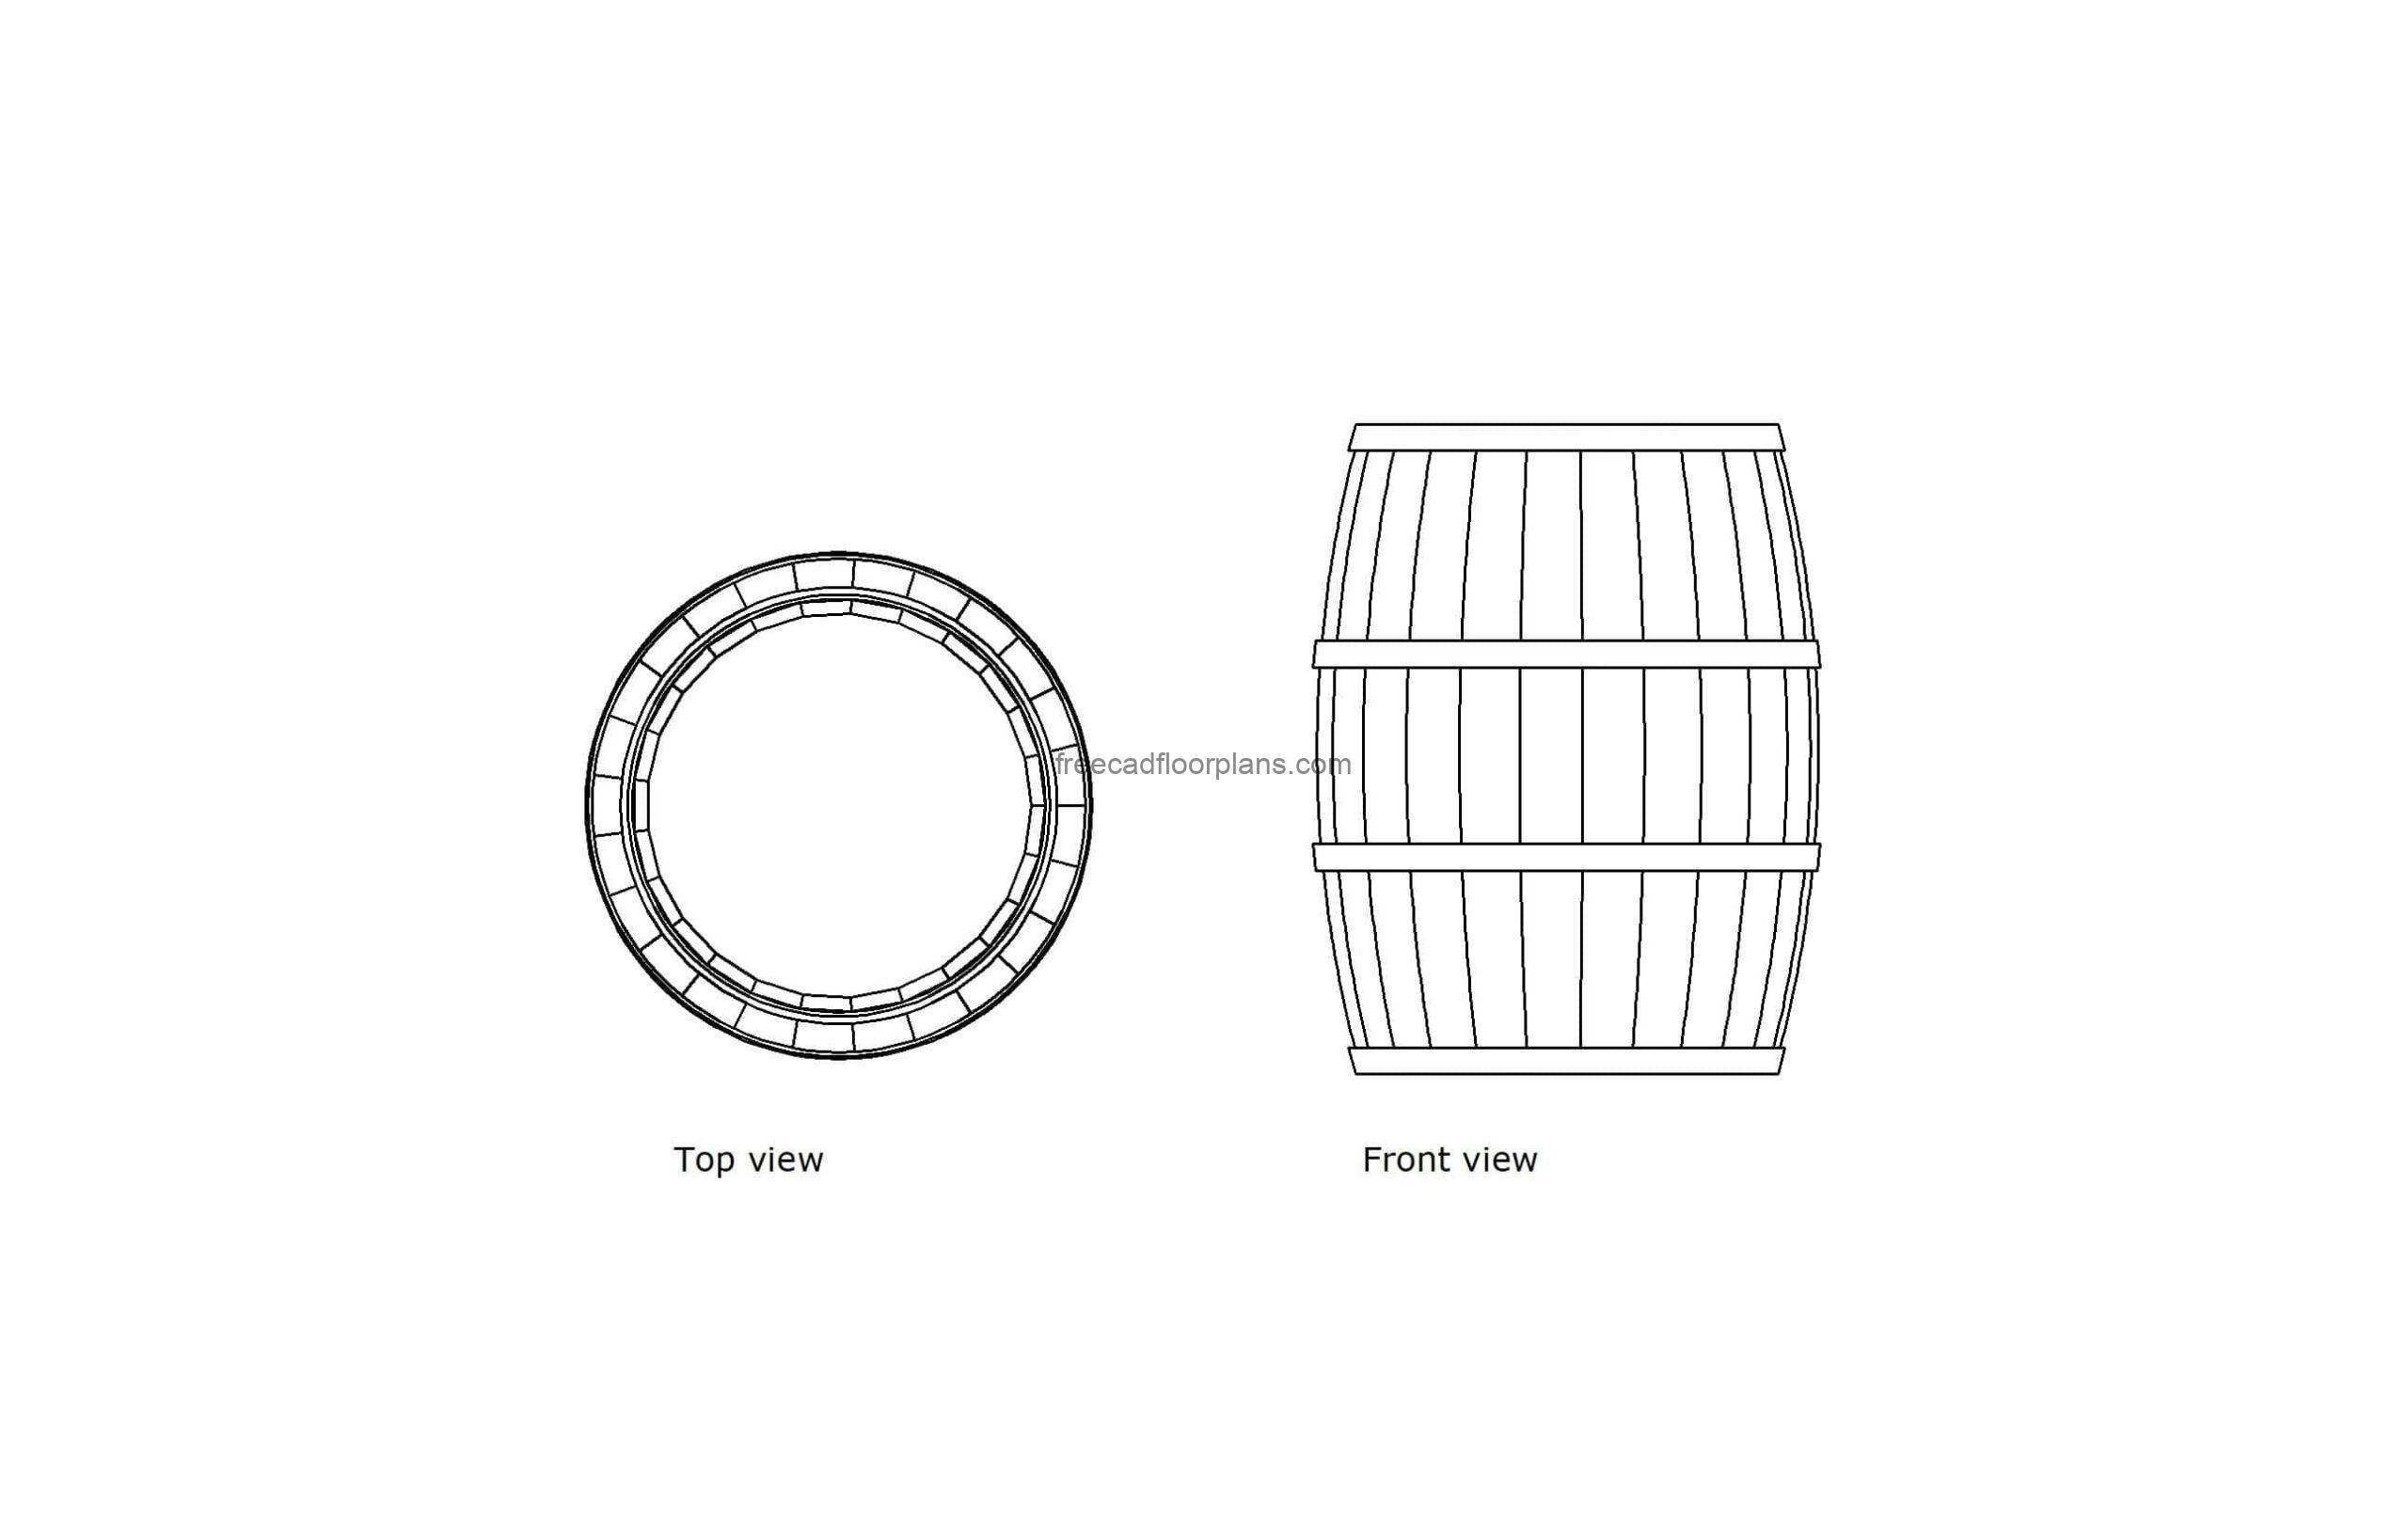 autocad drawing of a wood whiskey barrel, 2d views plan and elevation, dwg file for free download